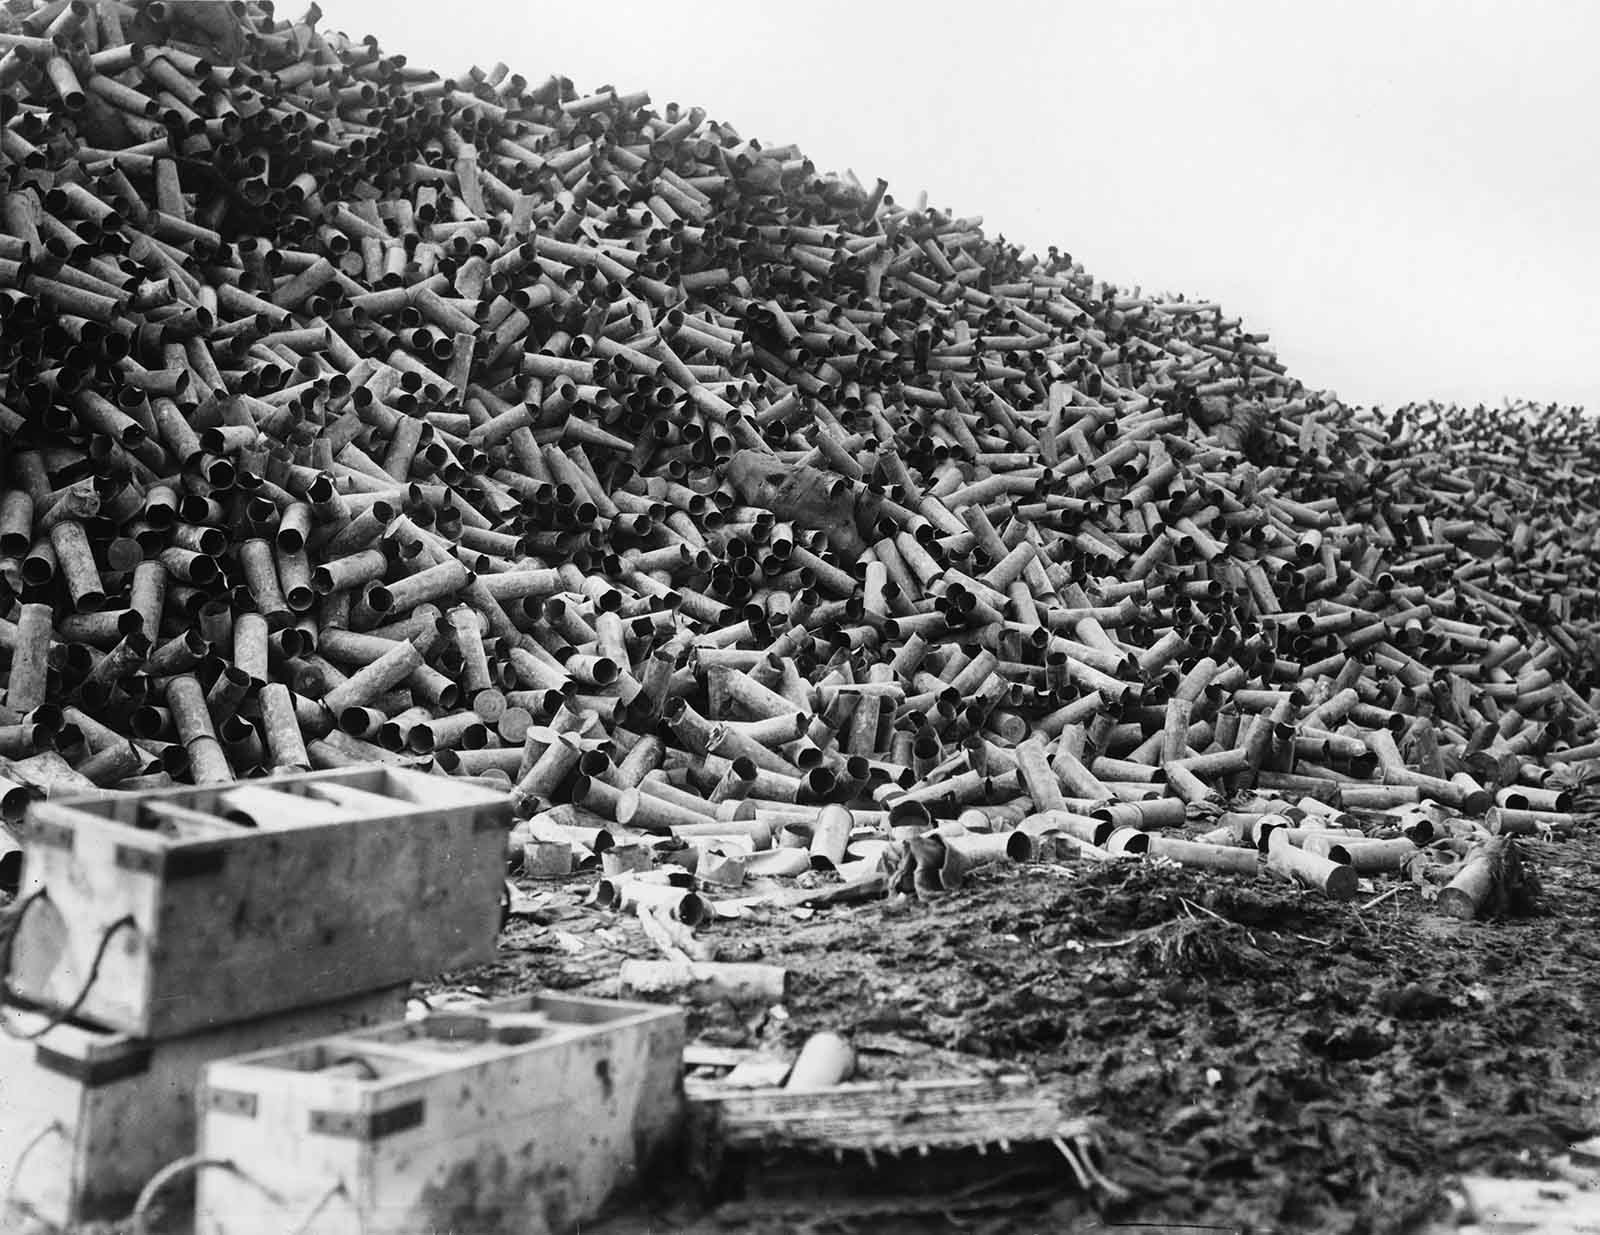 In the week leading up to the battle, over 1.5 million shells were fired.